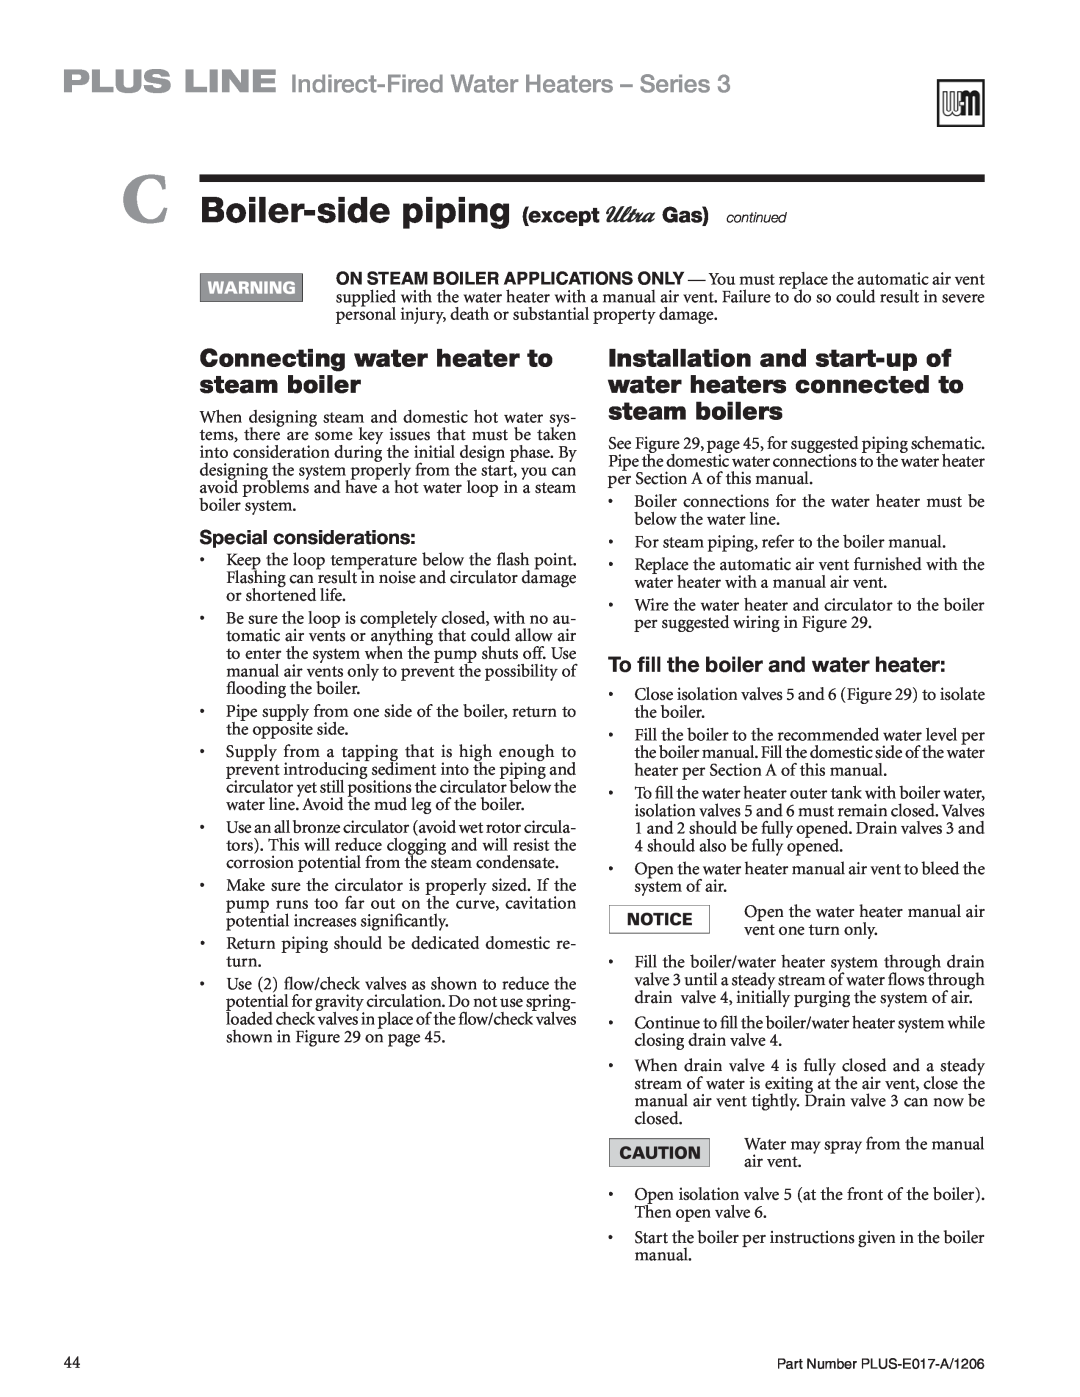 Weil-McLain PLUS-E017-A/1206 manual Connecting water heater to steam boiler, To fill the boiler and water heater 